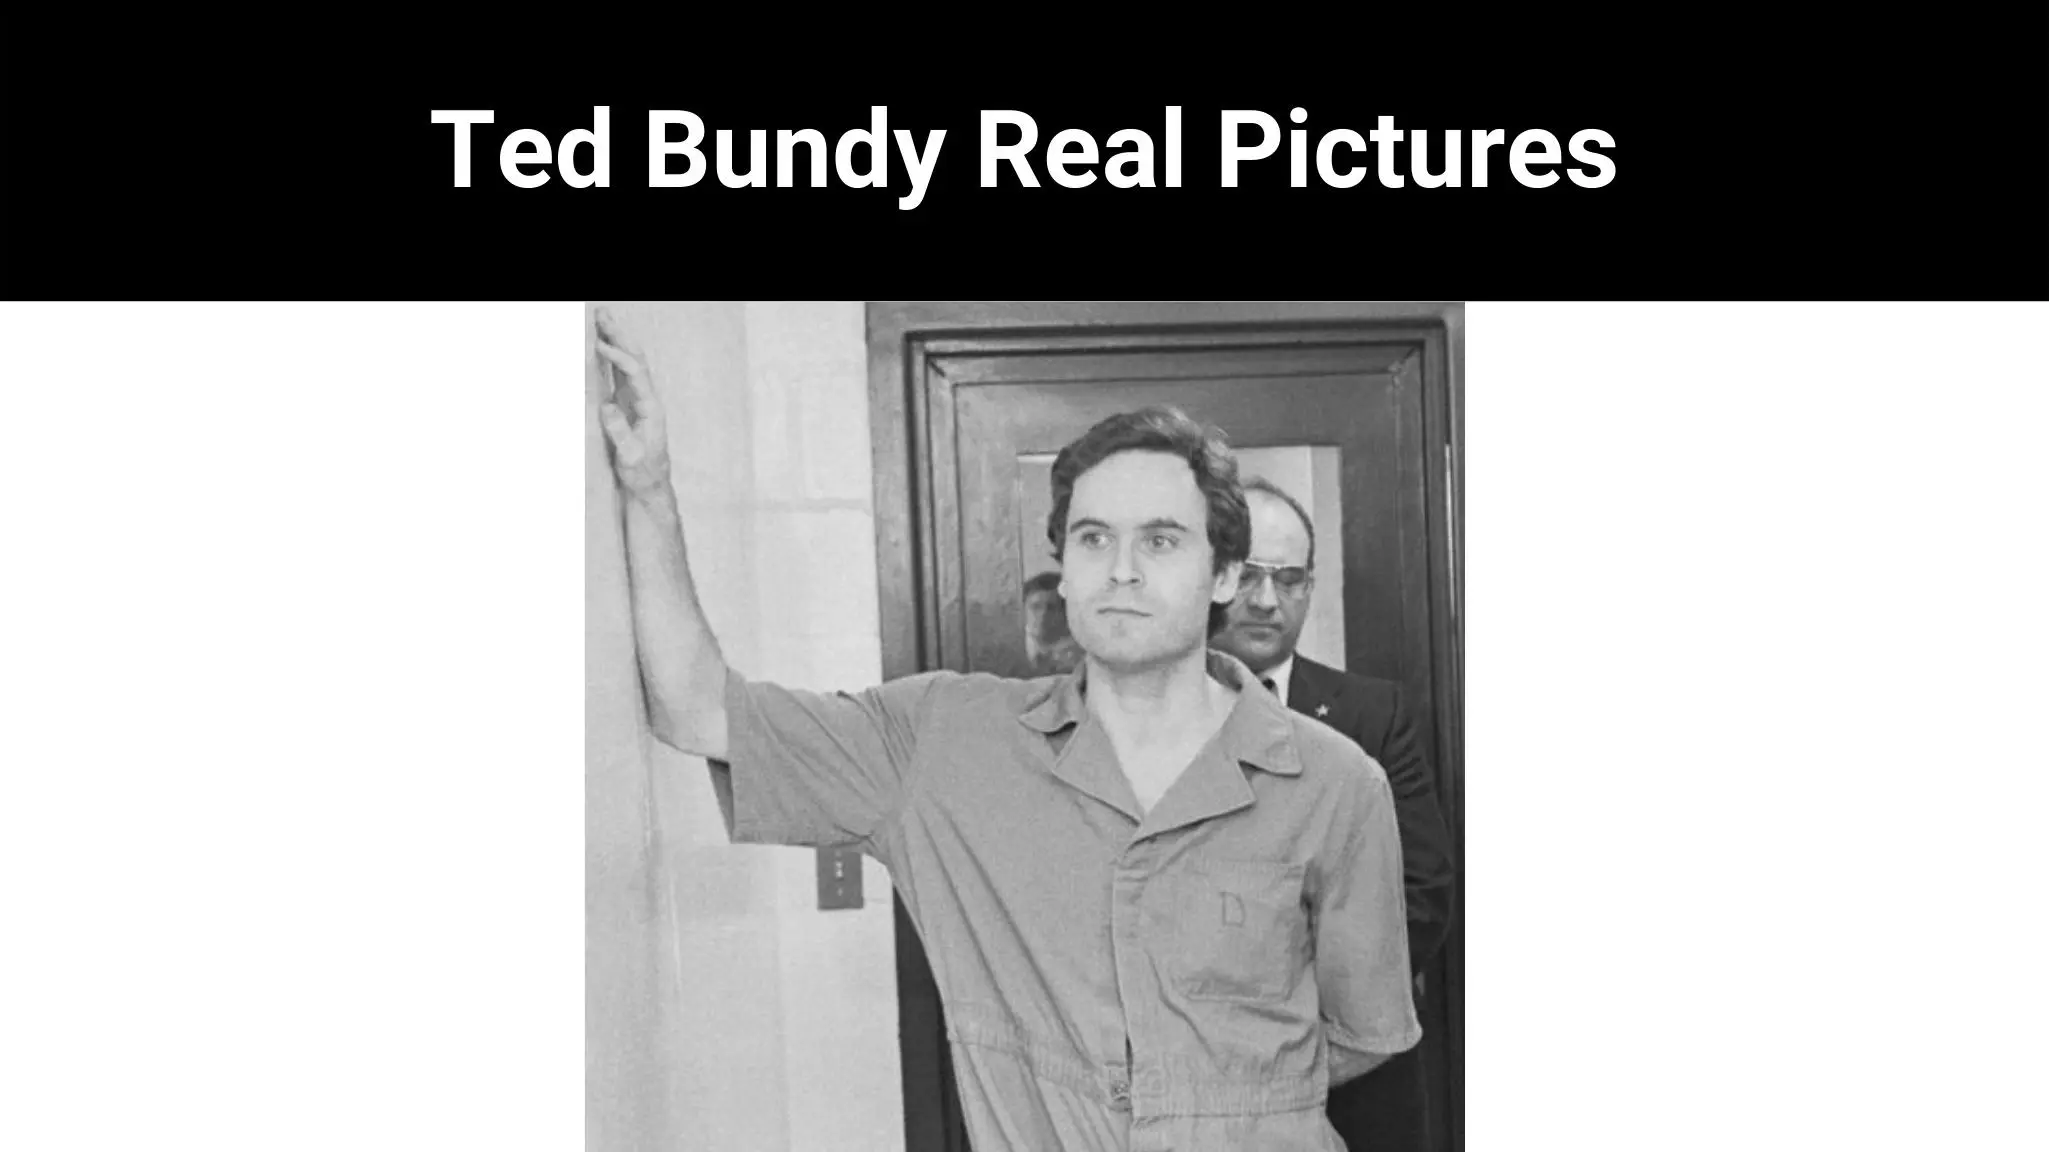 Ted Bundy Real Pictures